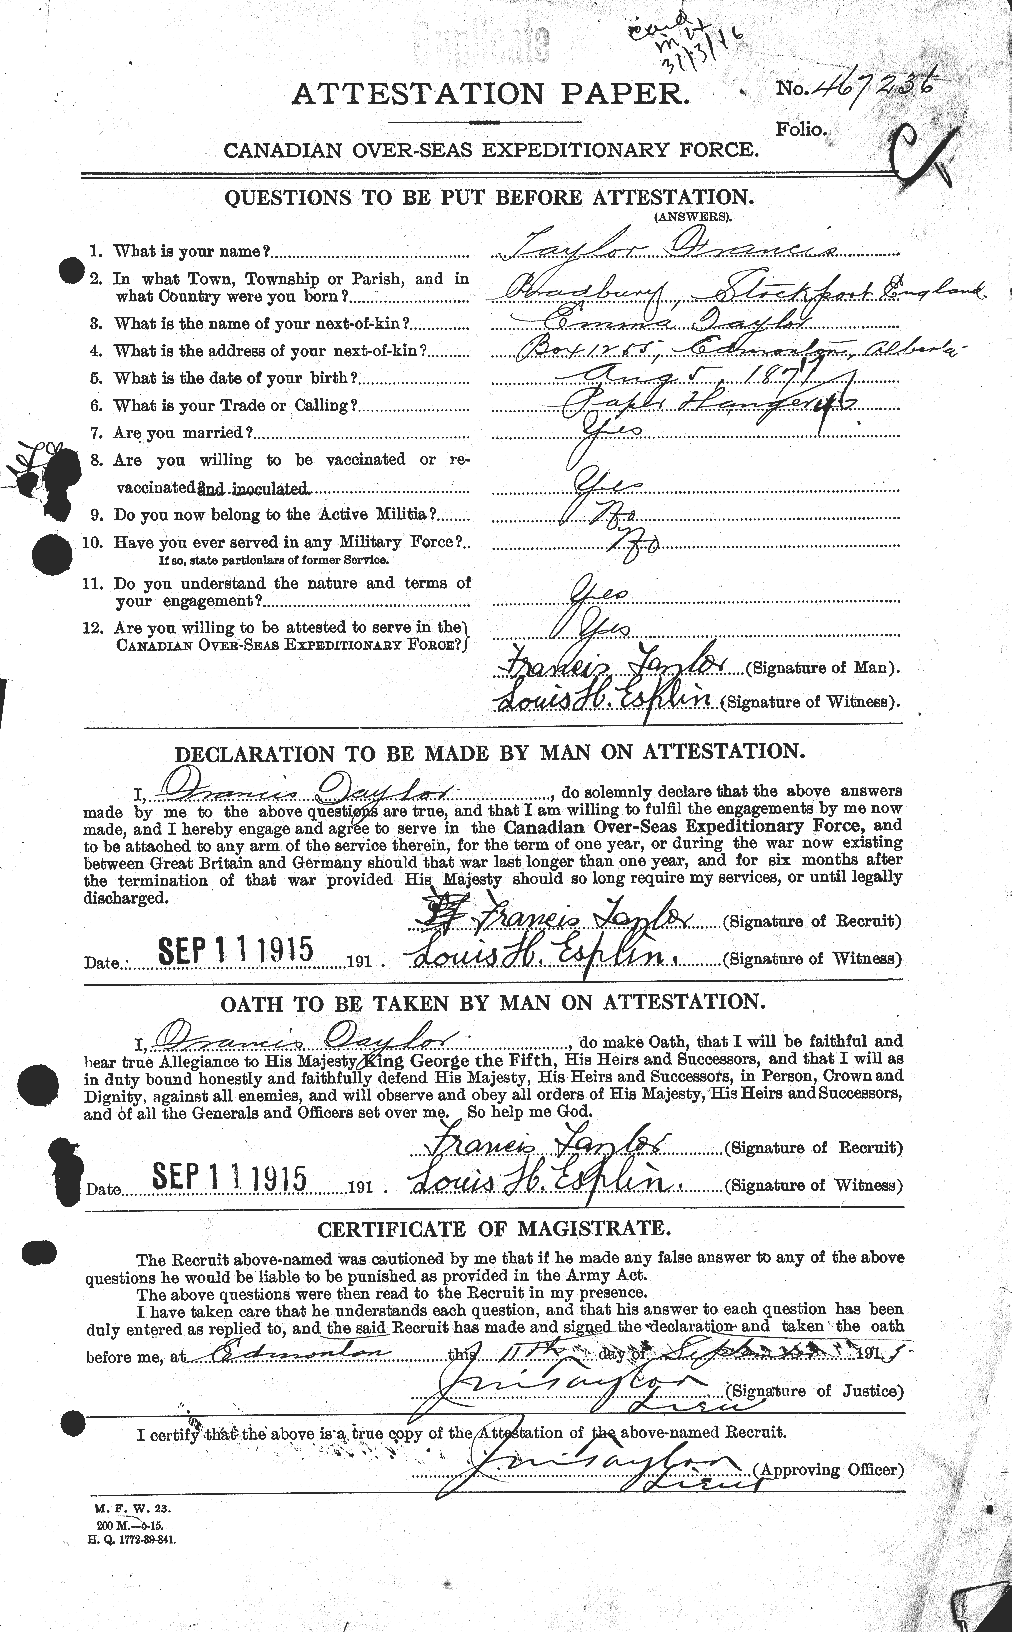 Personnel Records of the First World War - CEF 625673a